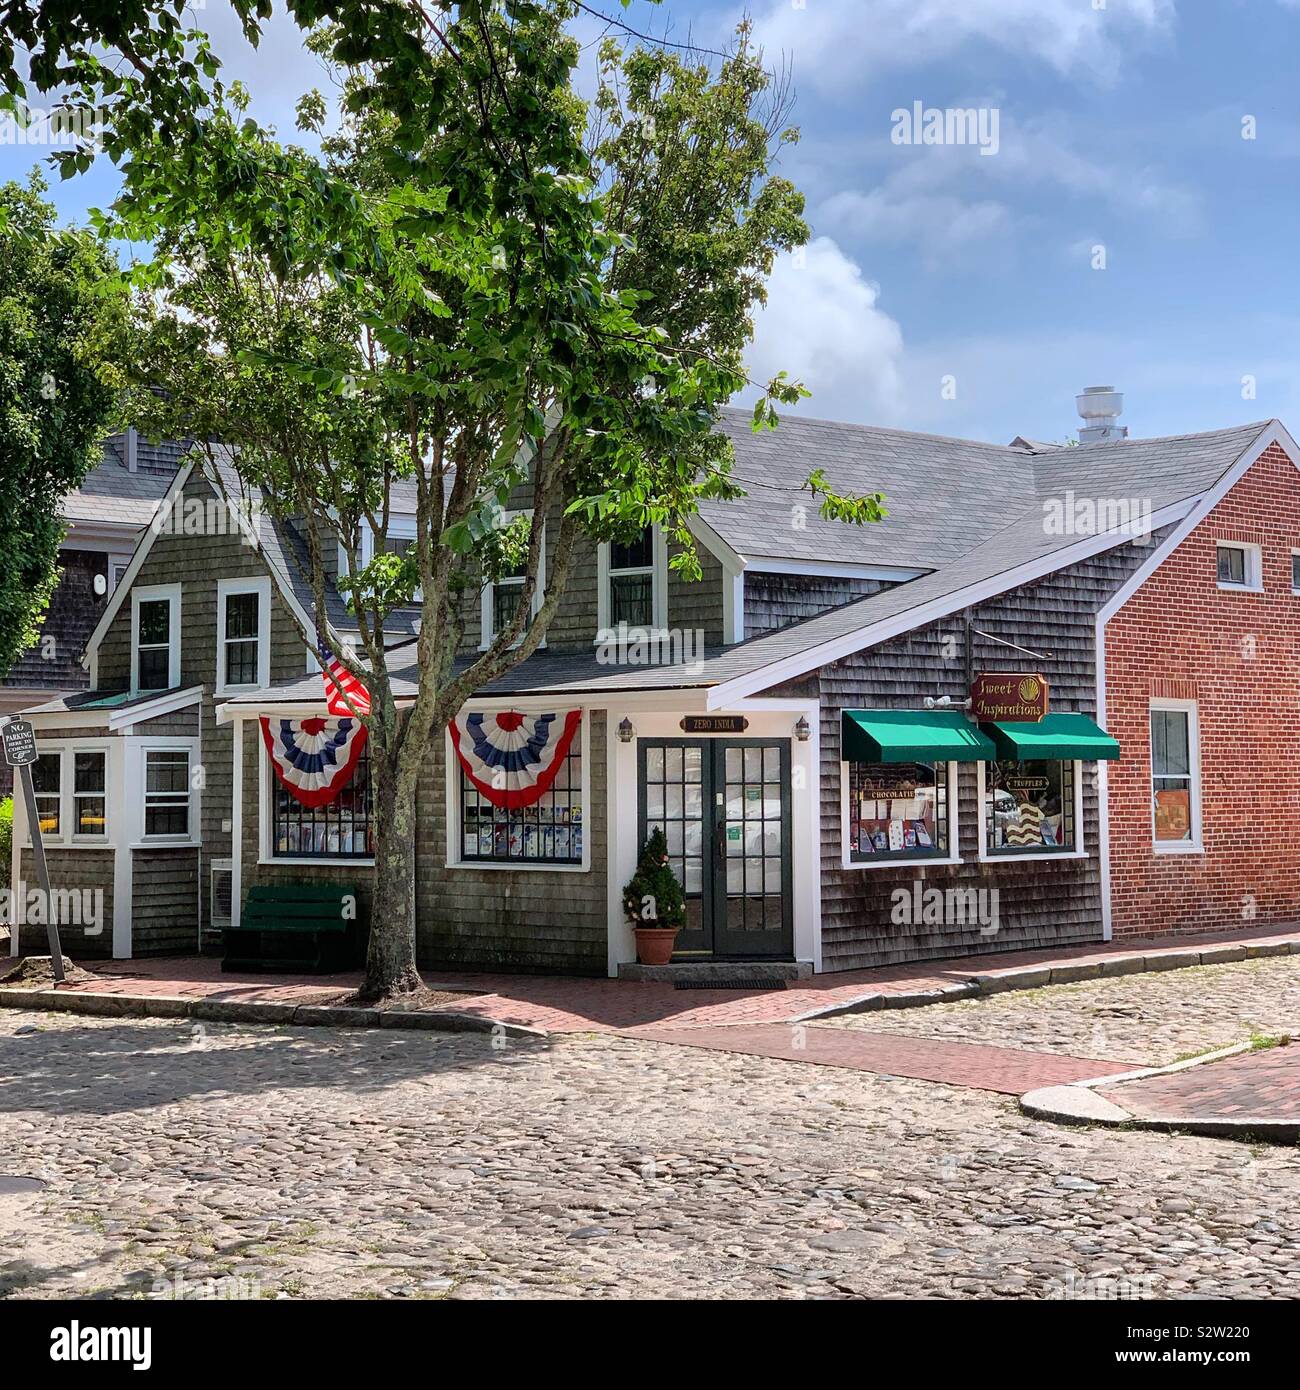 Cobblestone streets in the Town of Nantucket, Massachusetts, United States Stock Photo